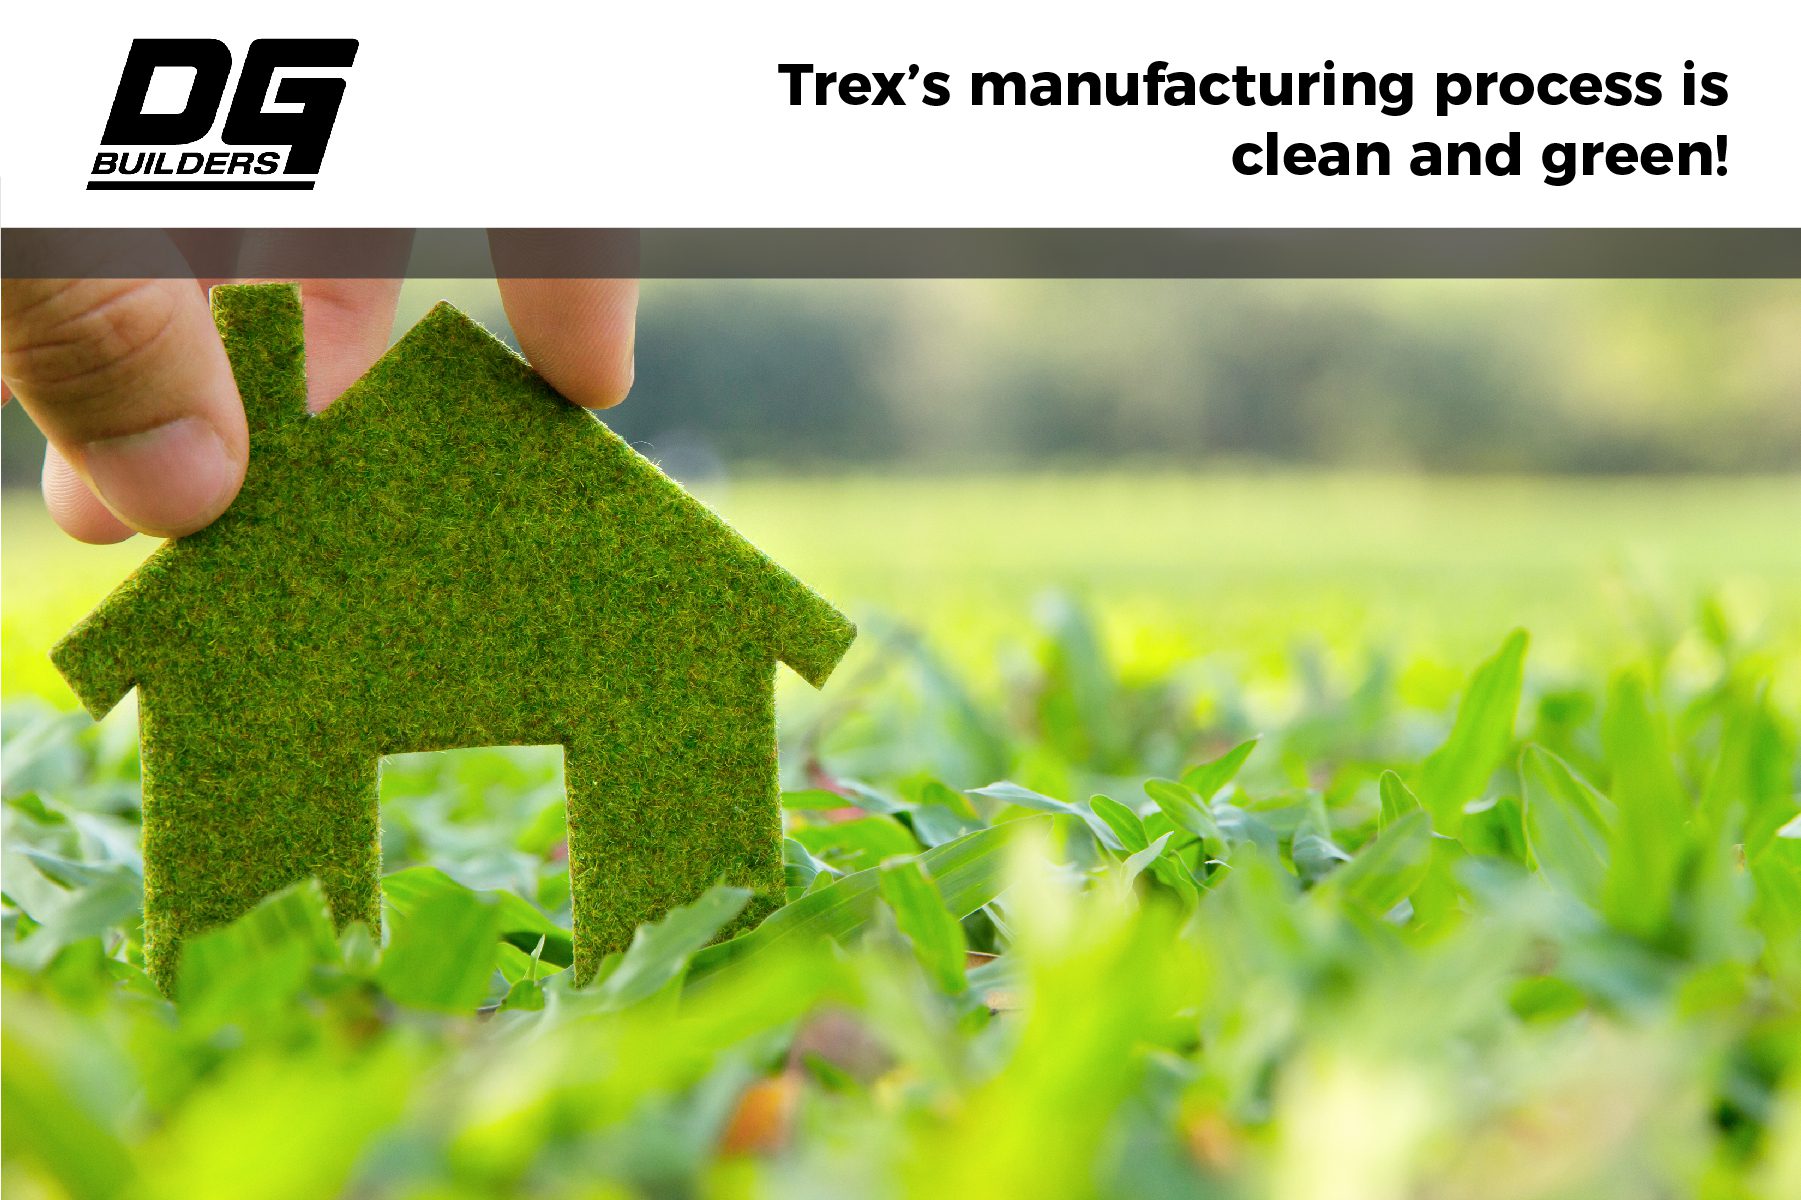 Trex's manufacturing process is clean and green